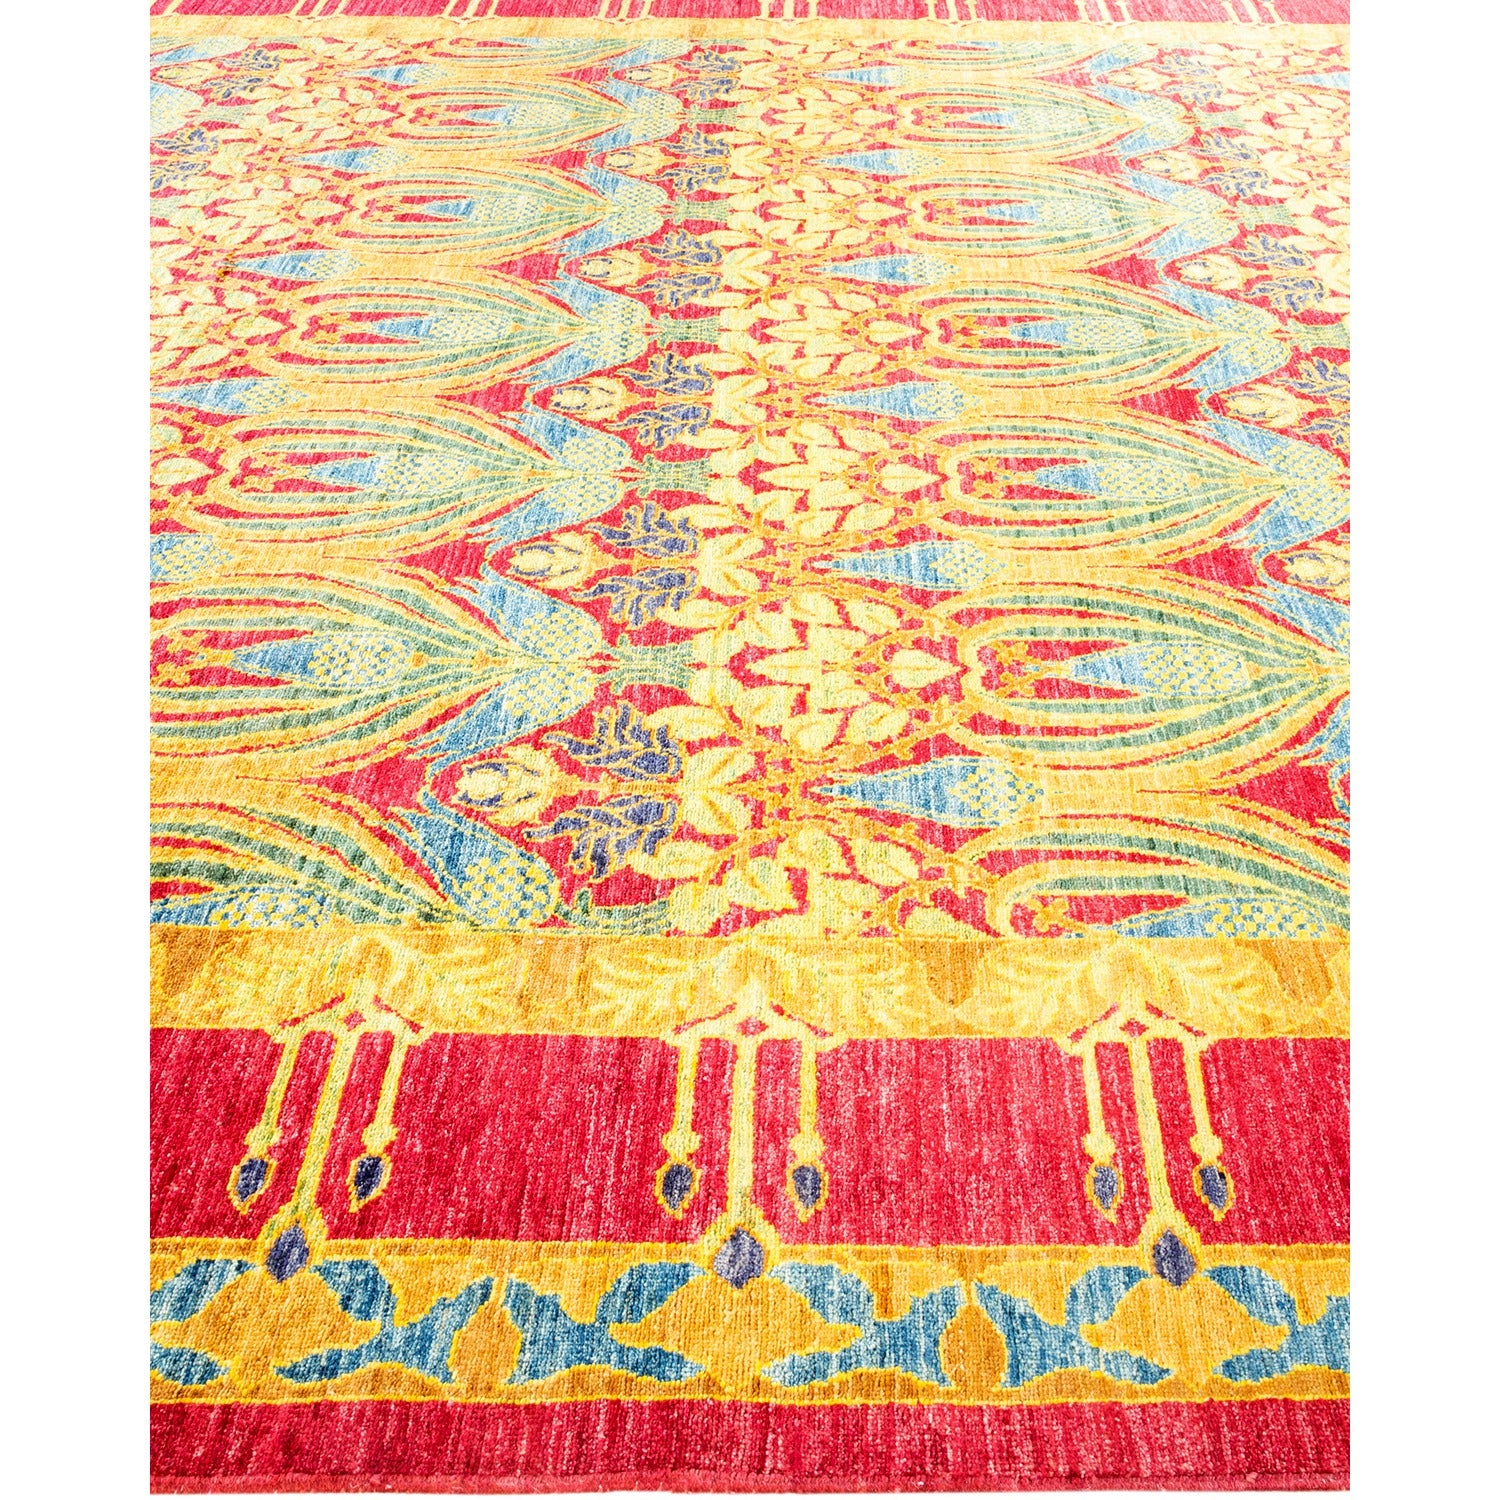 Vibrant, symmetrical carpet with intricate patterns and ornate geometry.